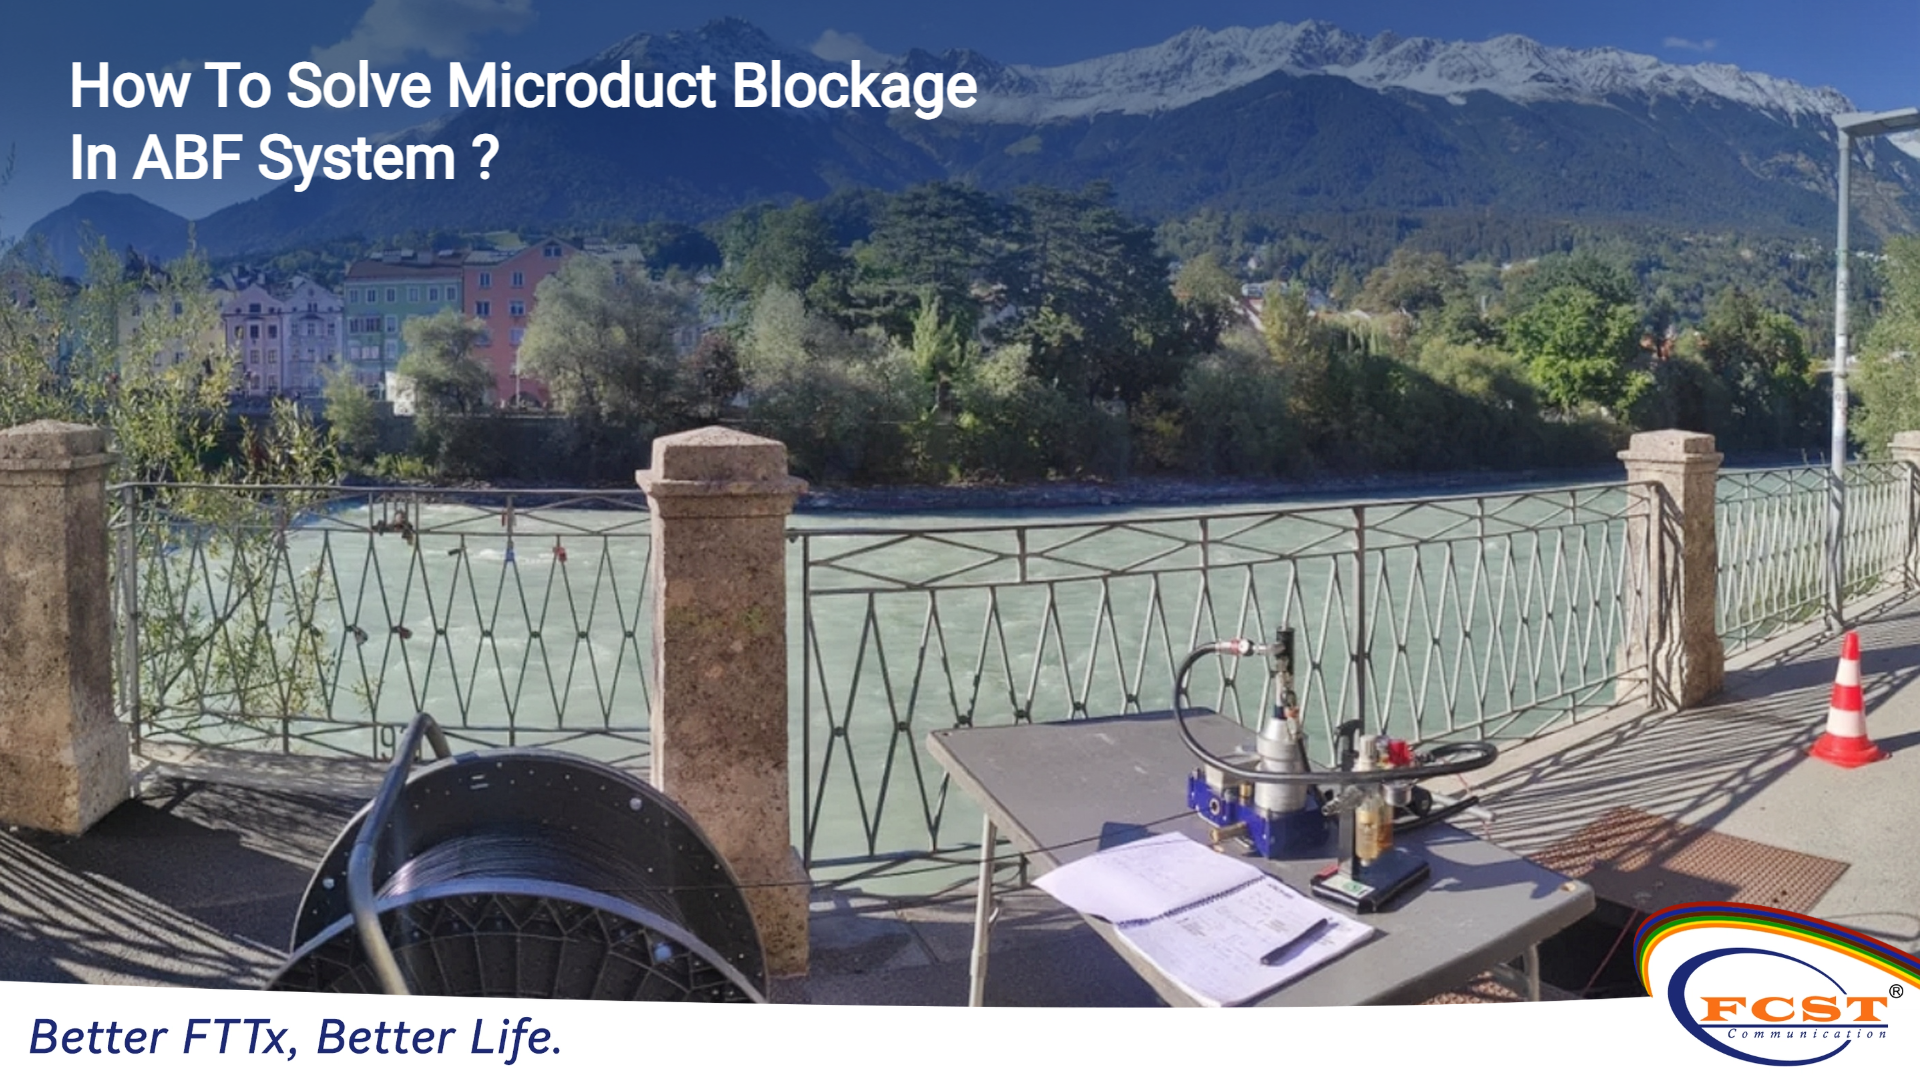 How To Solve Microduct Blockage In ABF System?